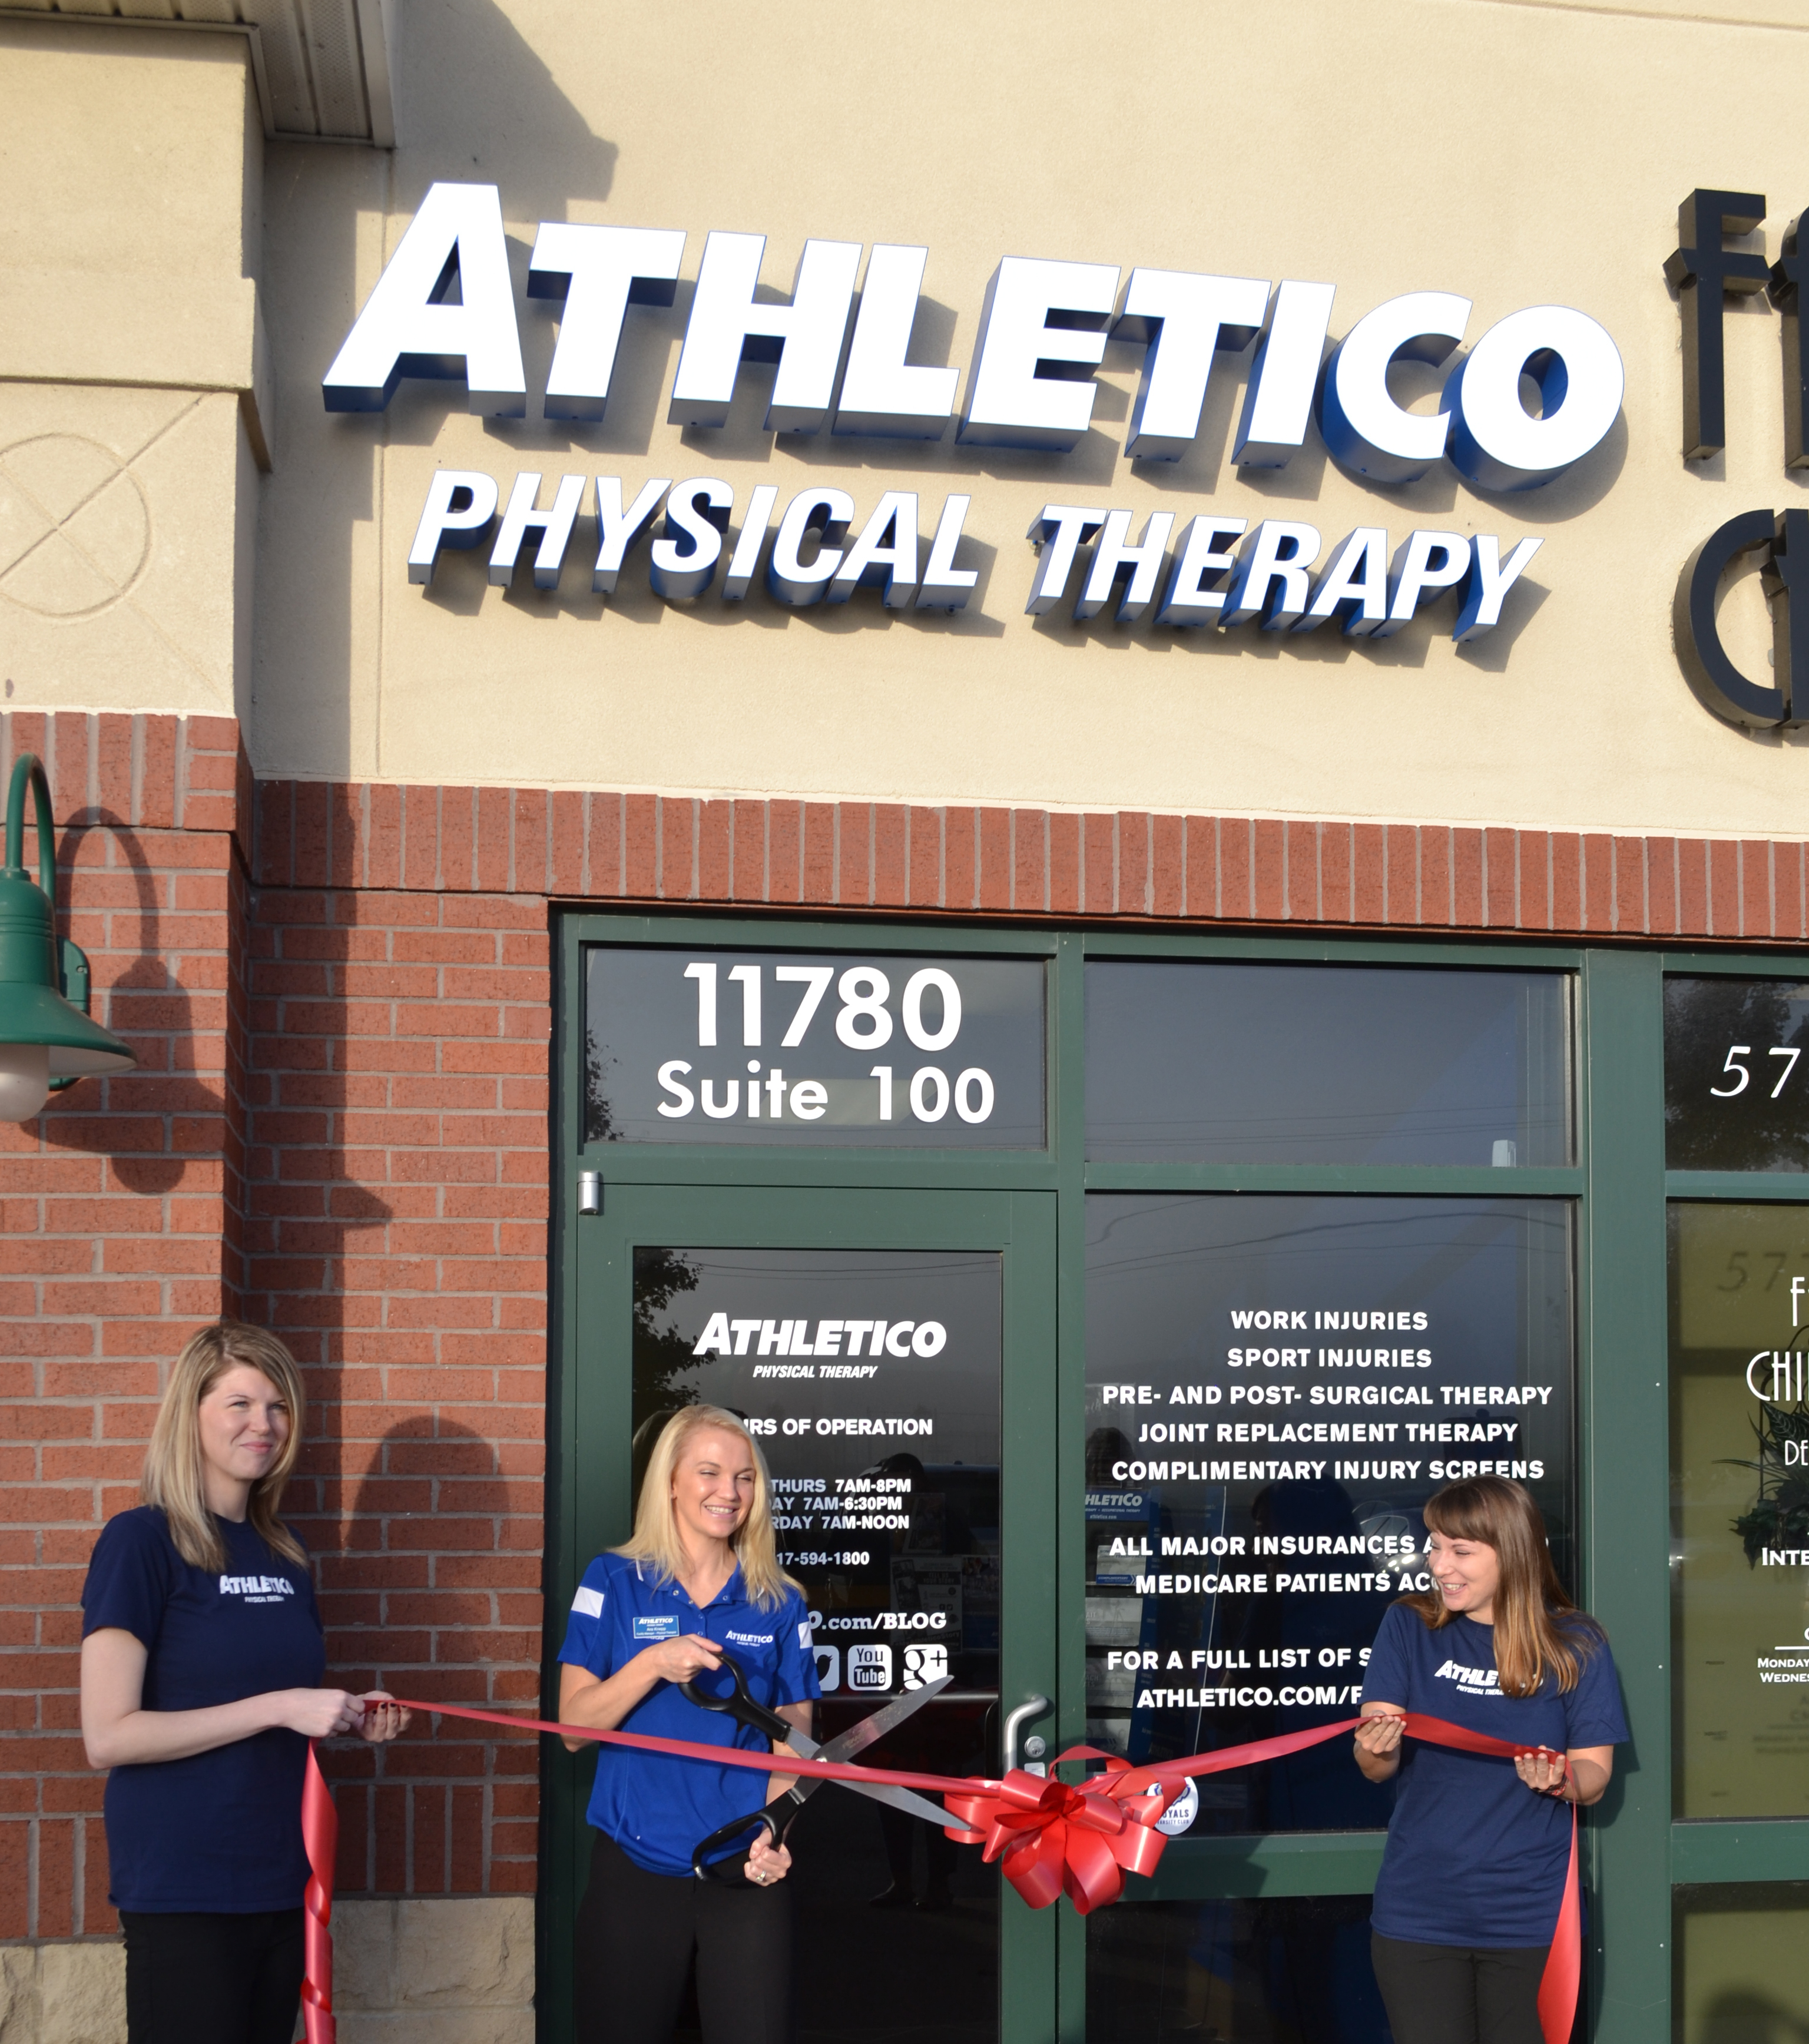 Athletico Physcial Therapy has opened its second facility in the Indianapolis area in Fishers at 11780 Olio Road, Suite 100. (Photo by John Cinnamon)